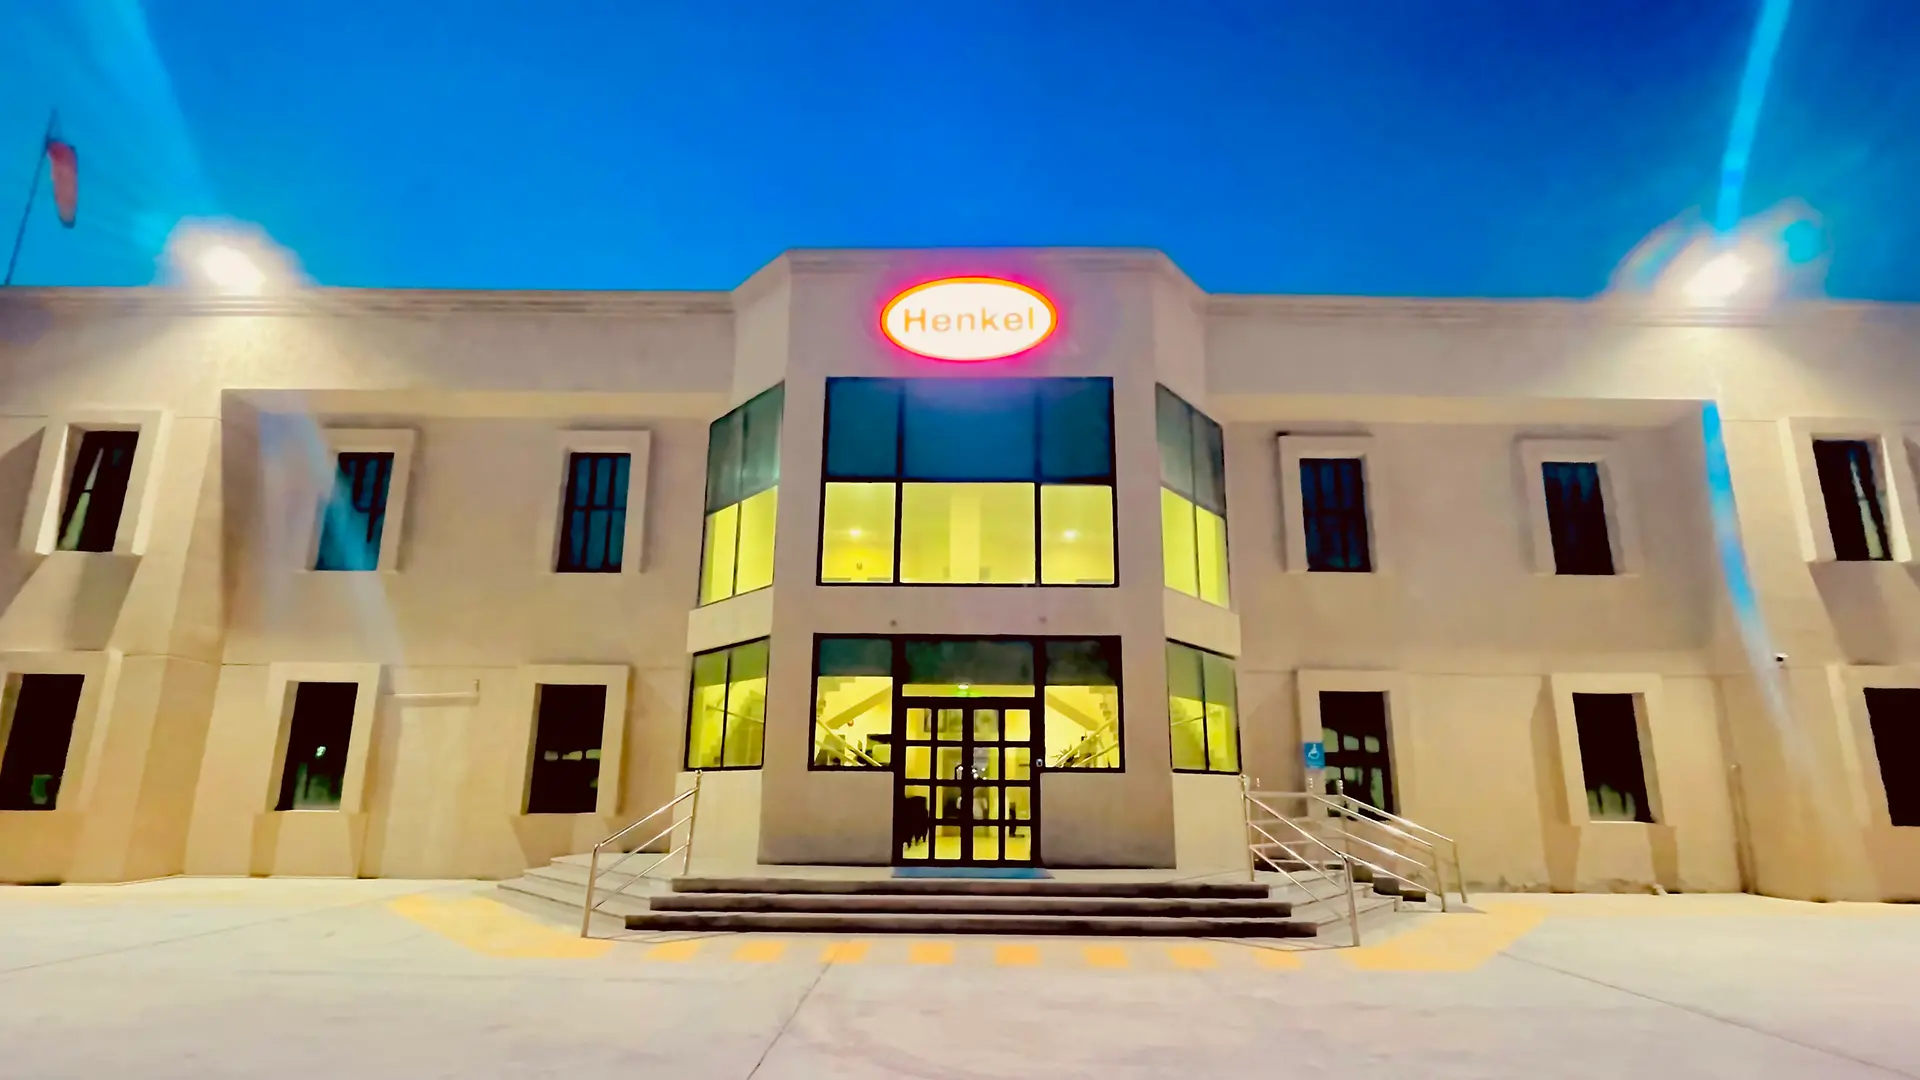 Front side of the Henkel building in Dammam with a bright Henkel logo in the middle of it.